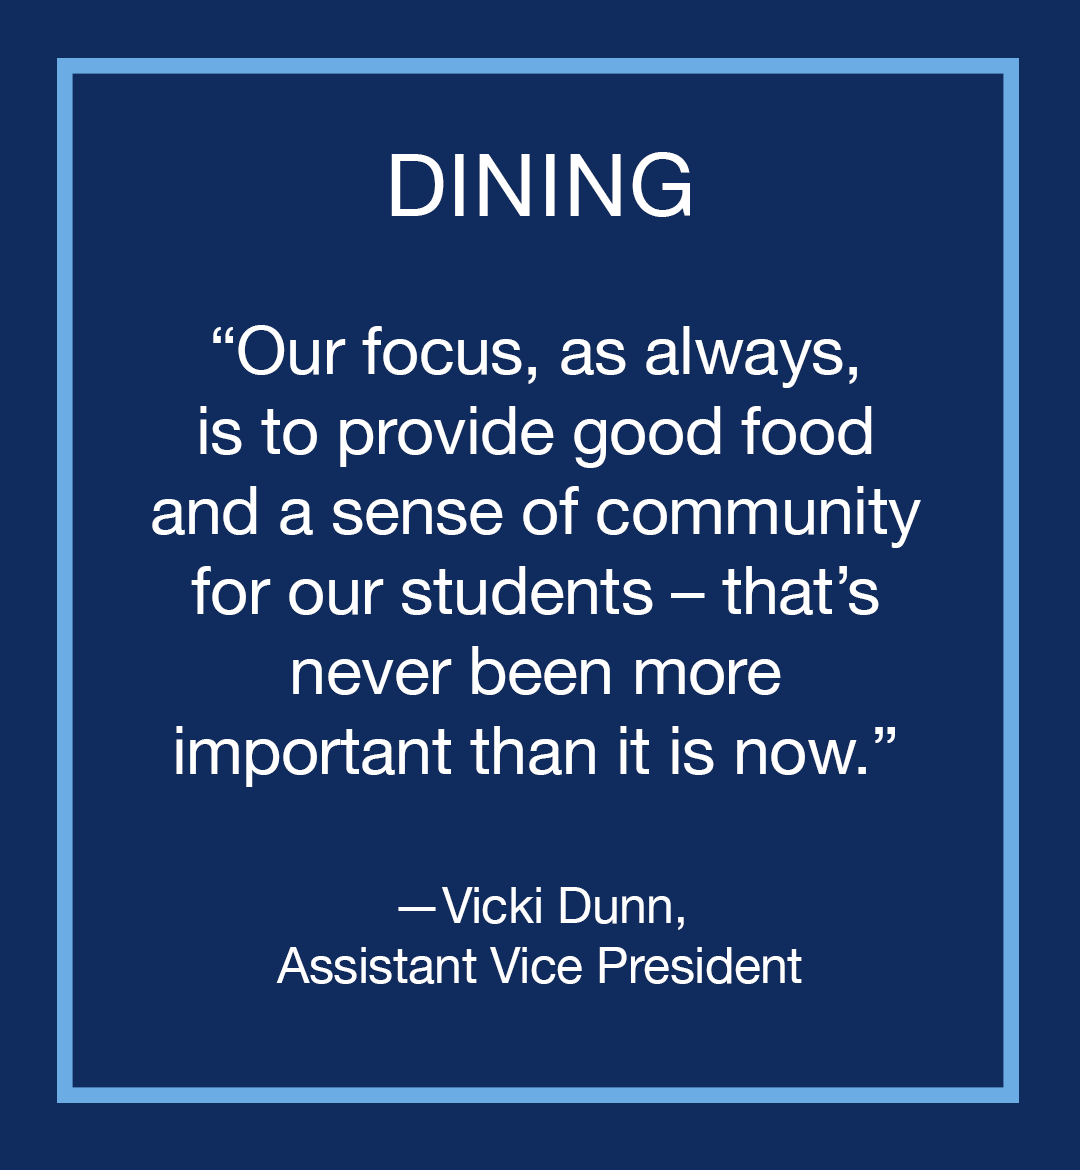 Image with text: Dining, "Our focus, as always, is to provide good food and a sense of community for our students – that’s never been more important than it is now," Vicki Dunn, Assistant Vice President